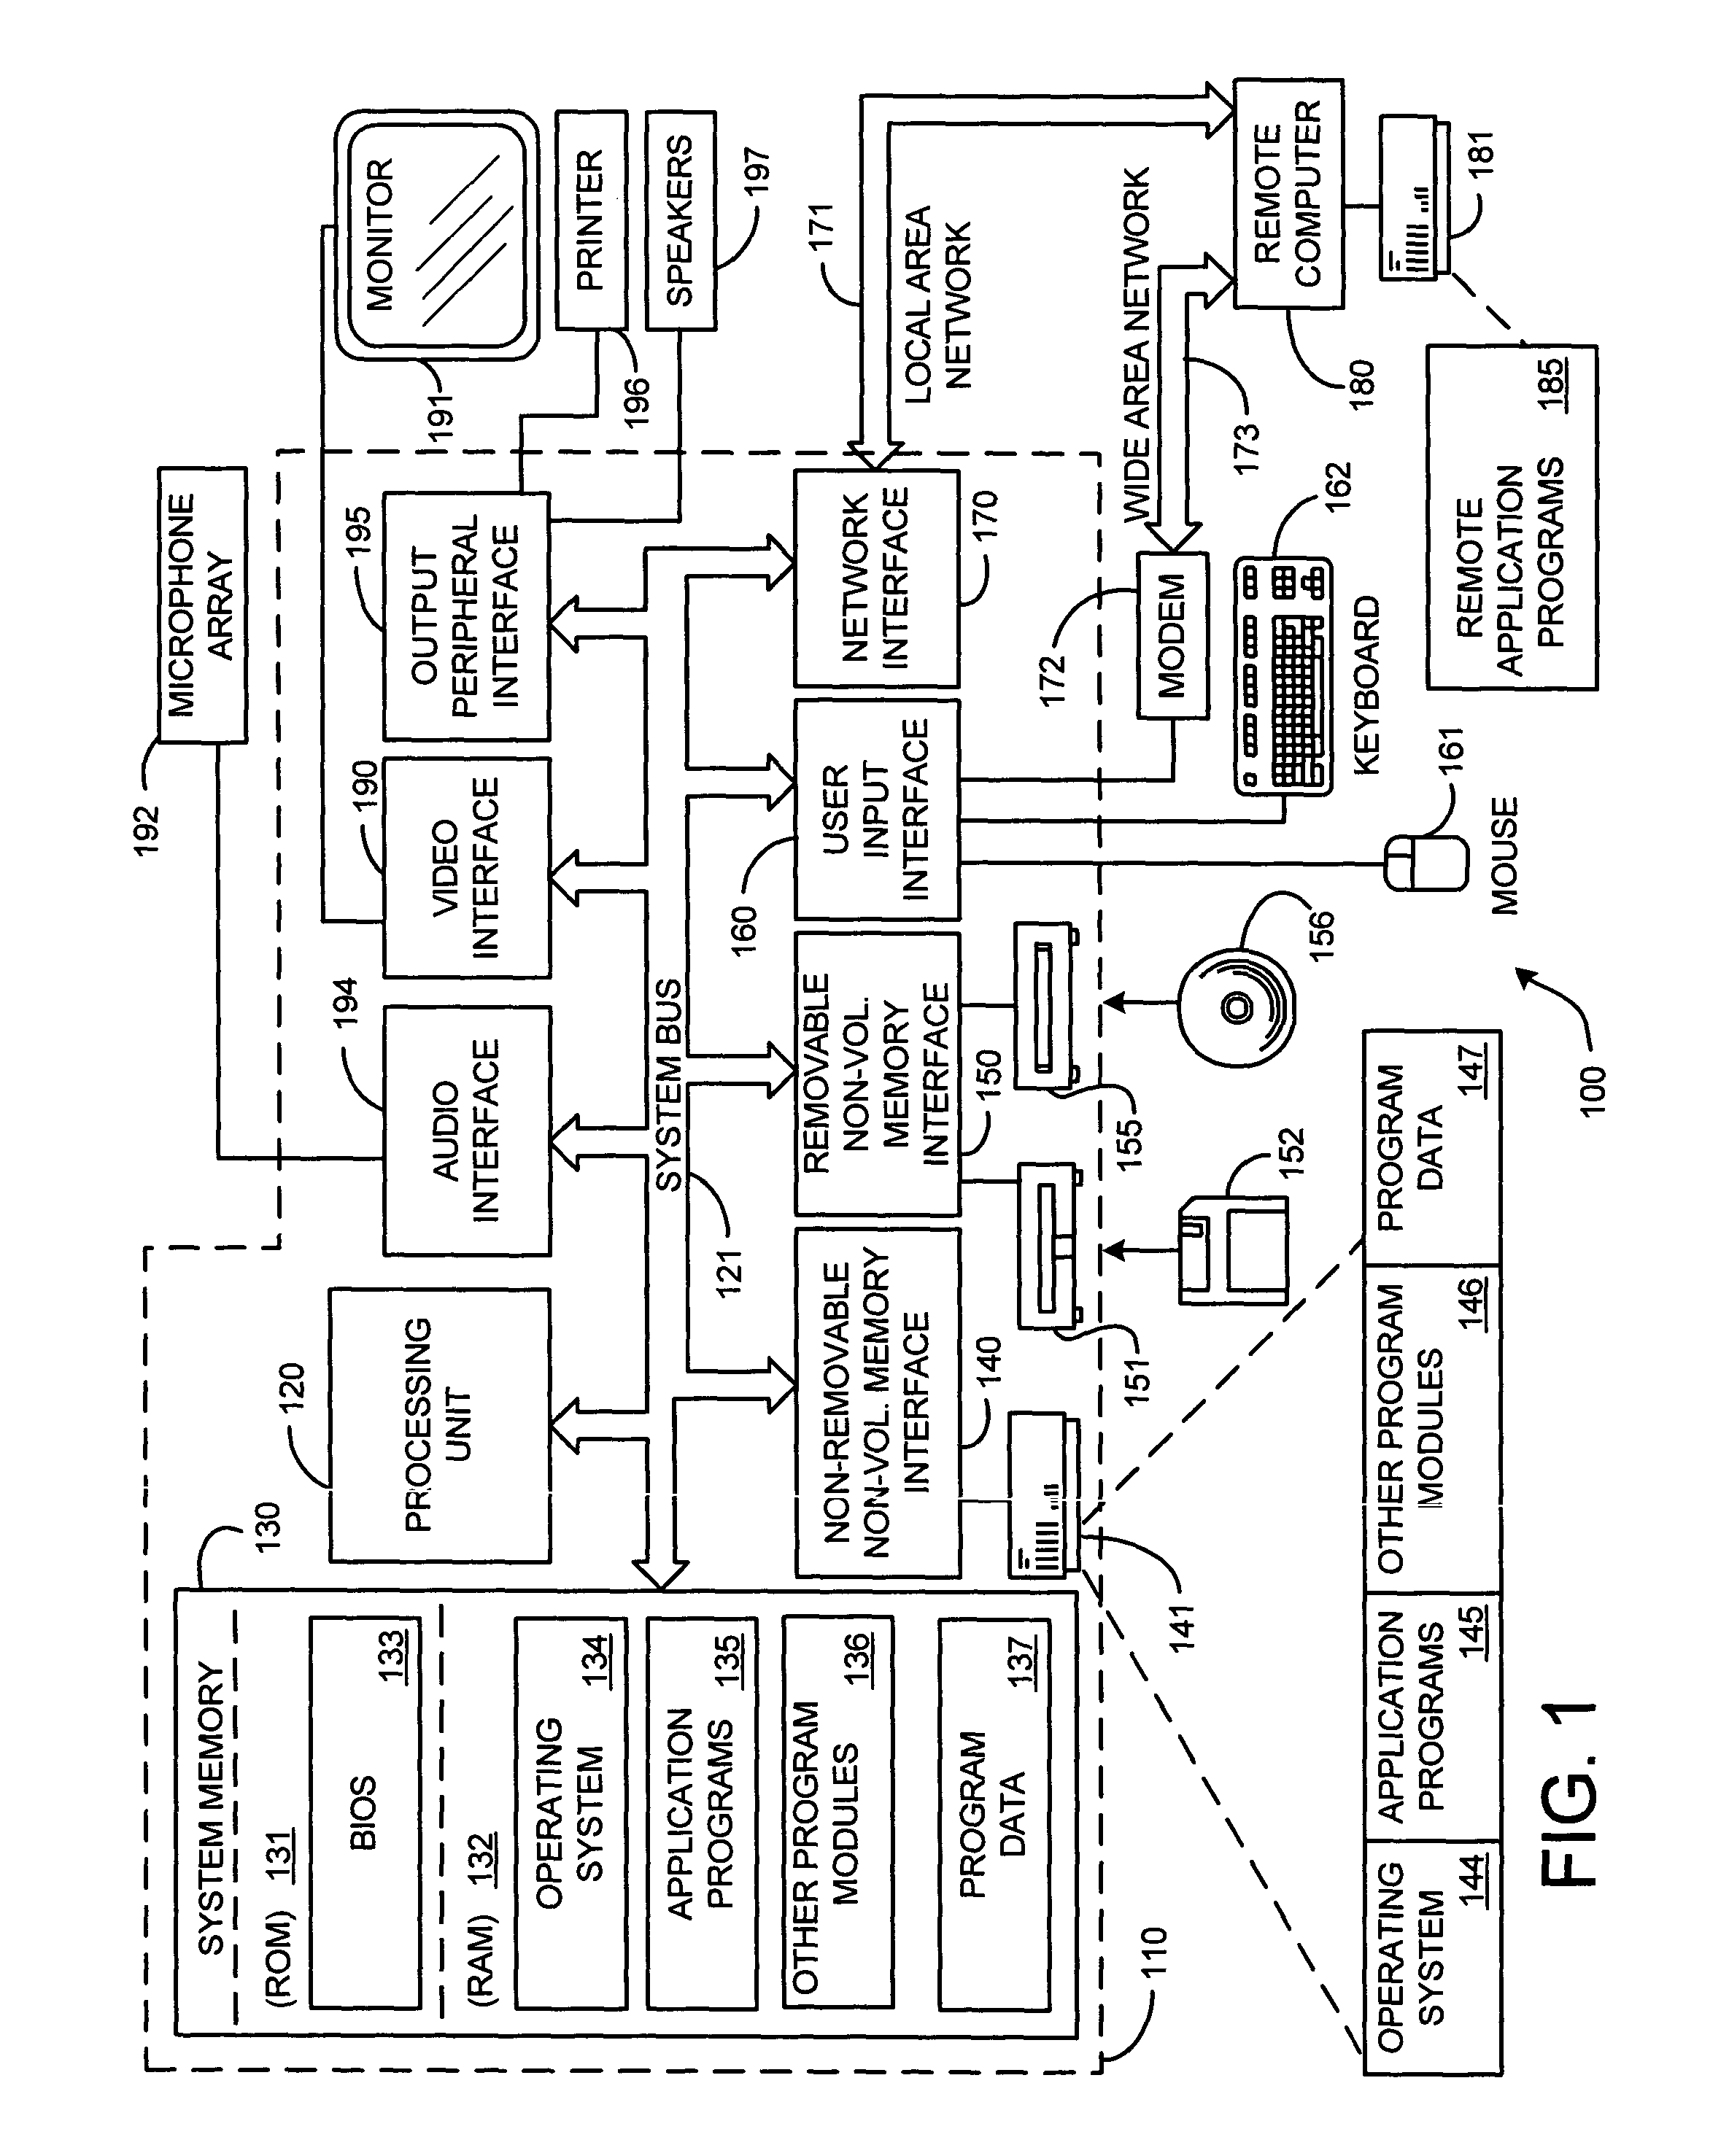 System and process for calibrating a microphone array